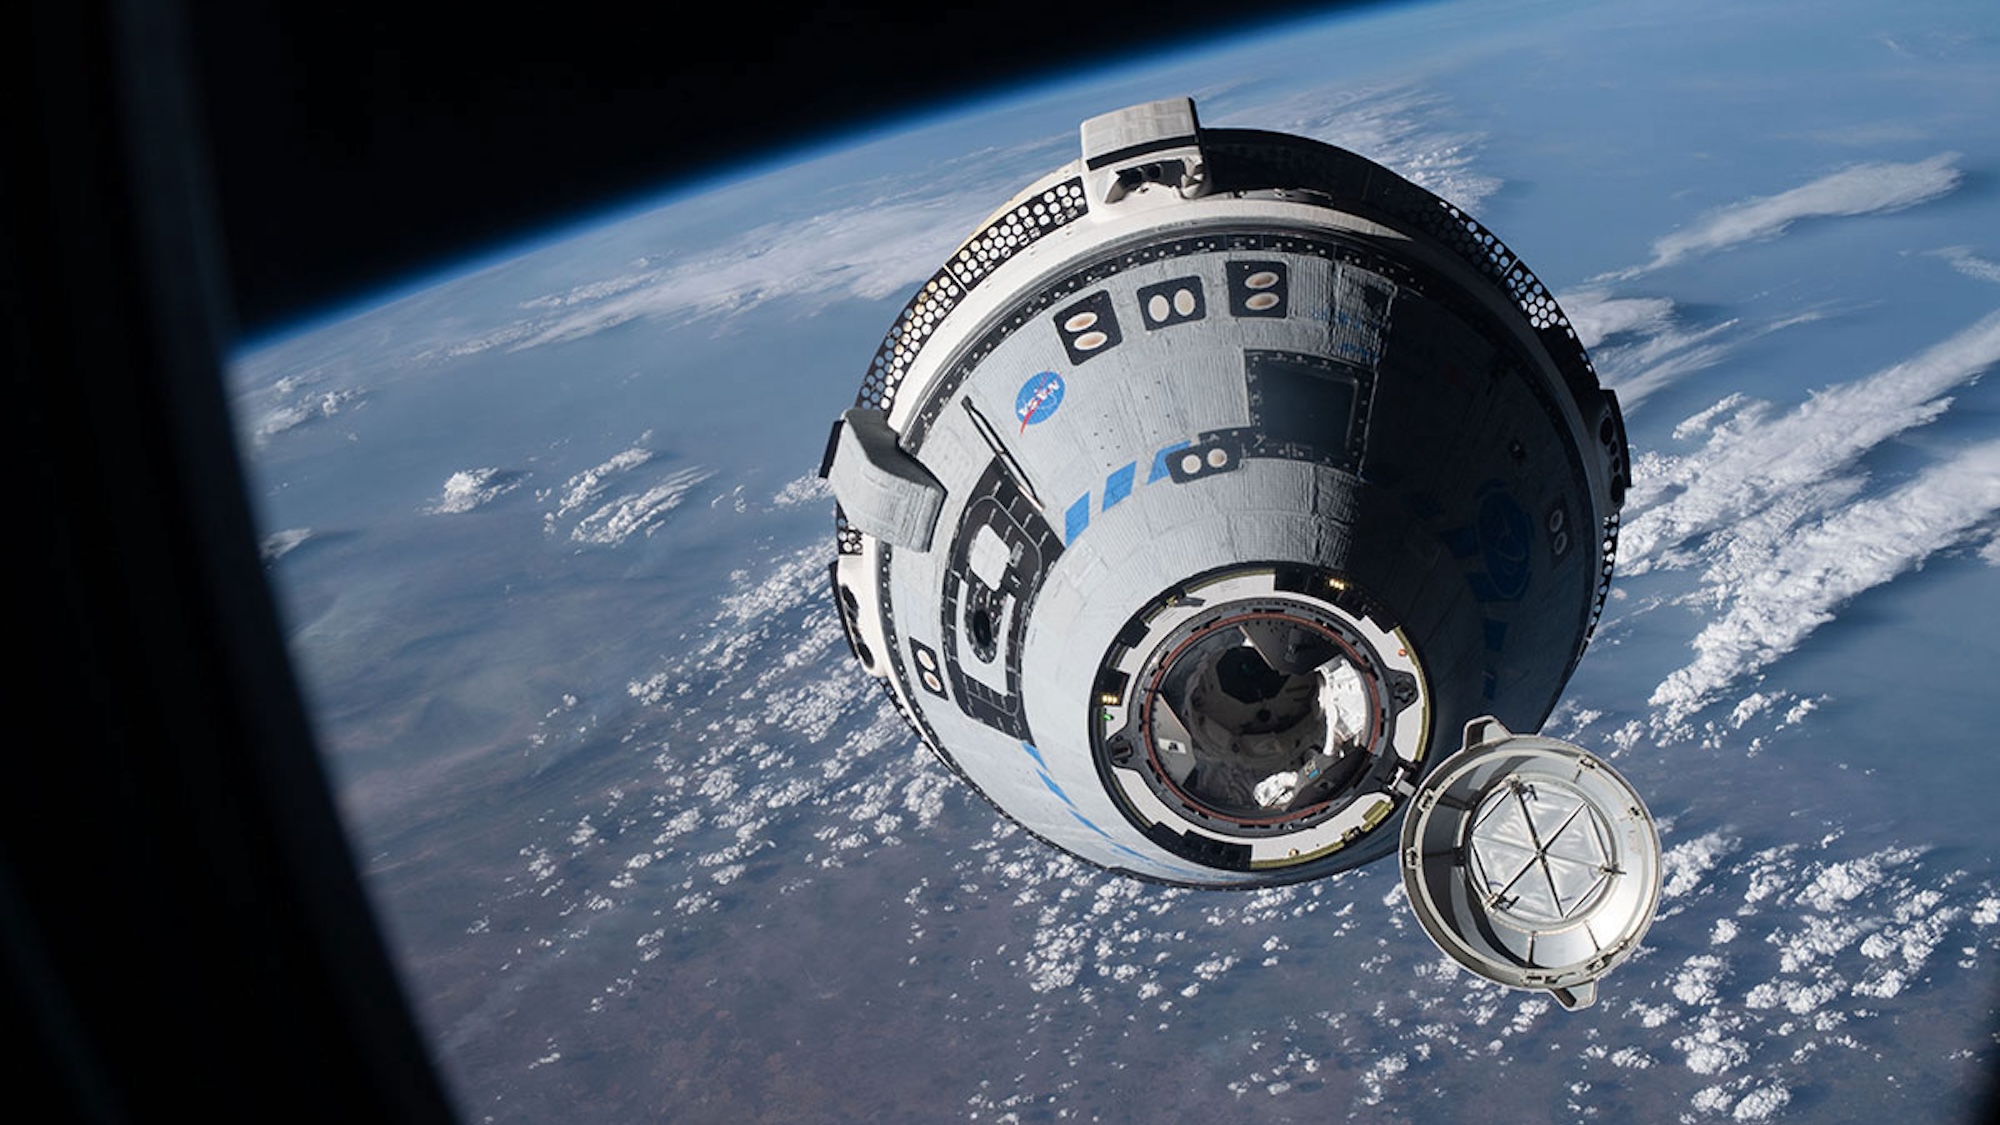 The CST-100 Starliner autonomously approaches the International Space Station during the uncrewed Orbital Flight Test-2 in May 2022.